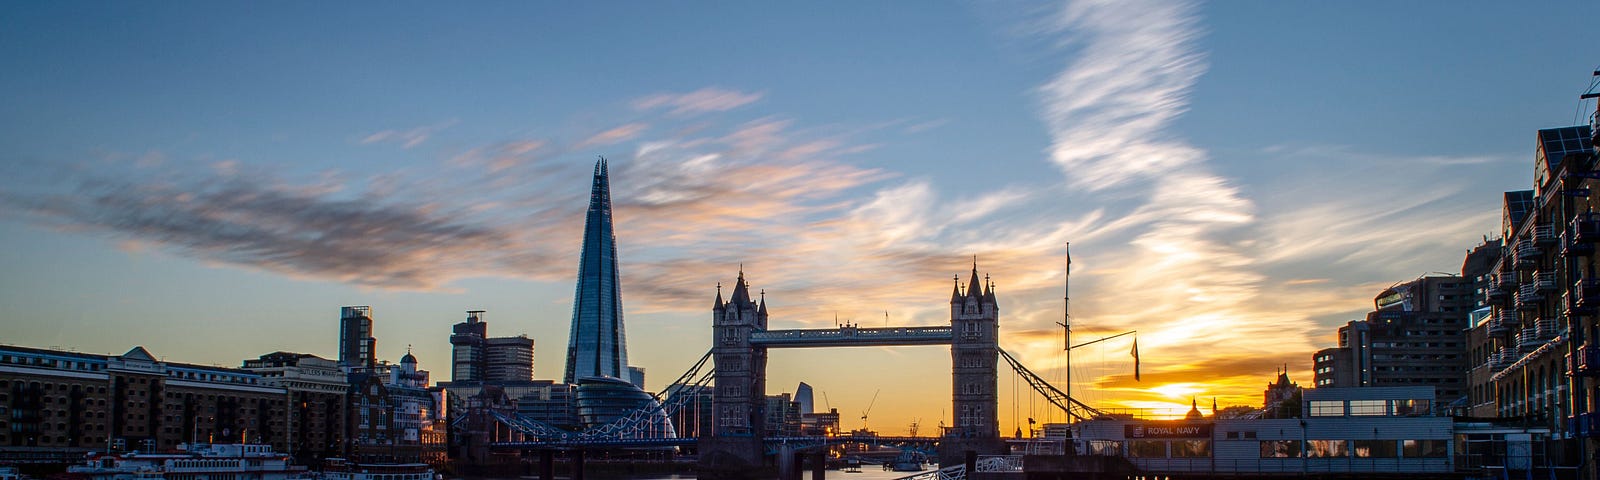 A beautiful sunset view looking over the Thames towards Tower Bridge and The Shard in London